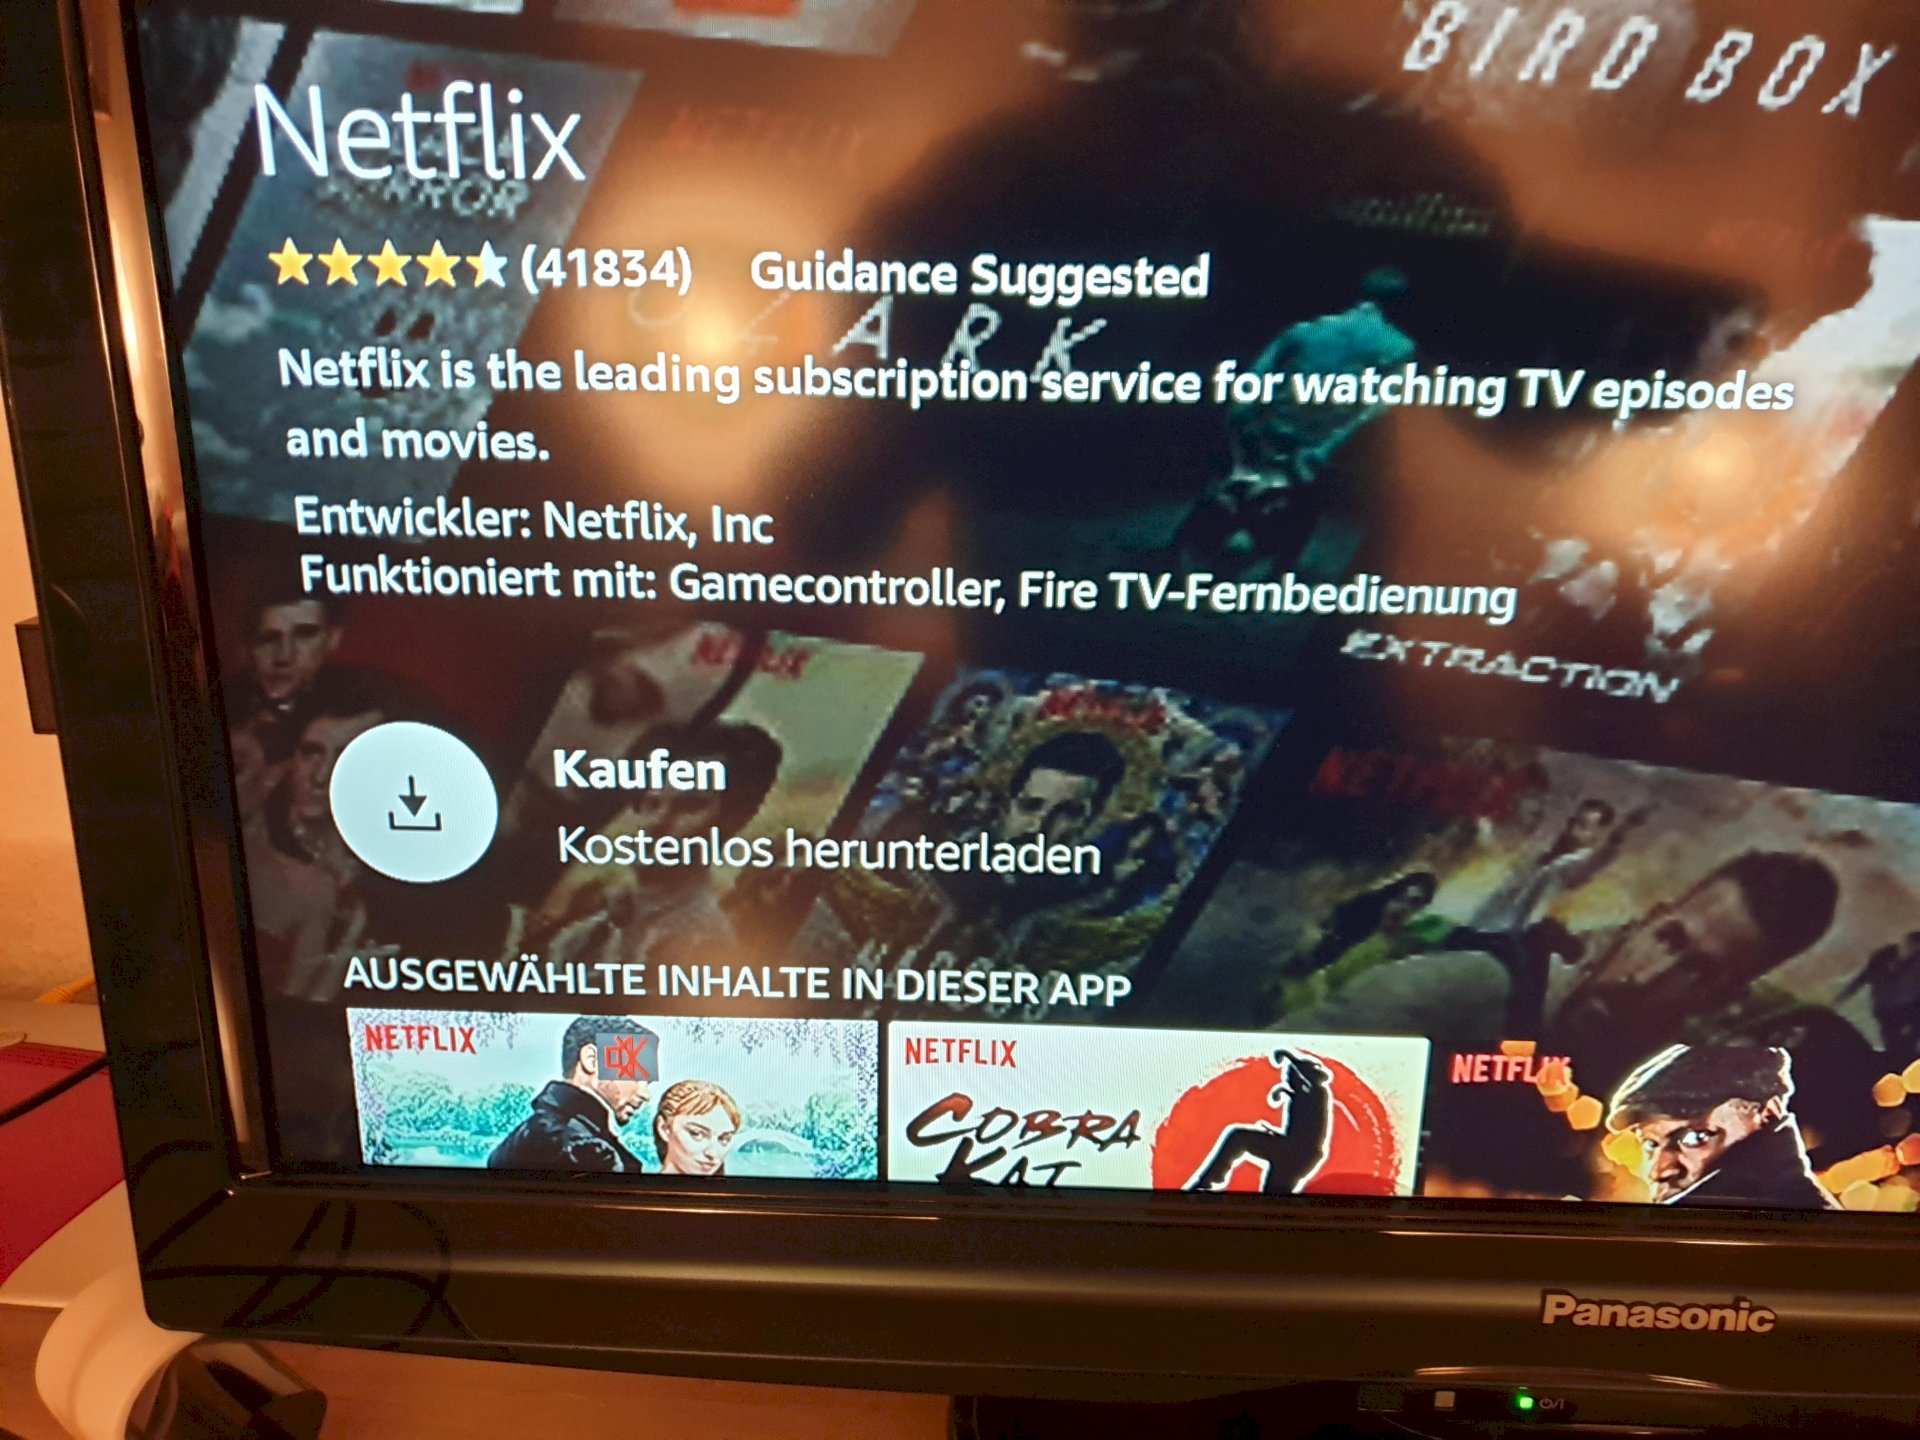 Why is it not possible to log in to Netflix using the amazon fire stick